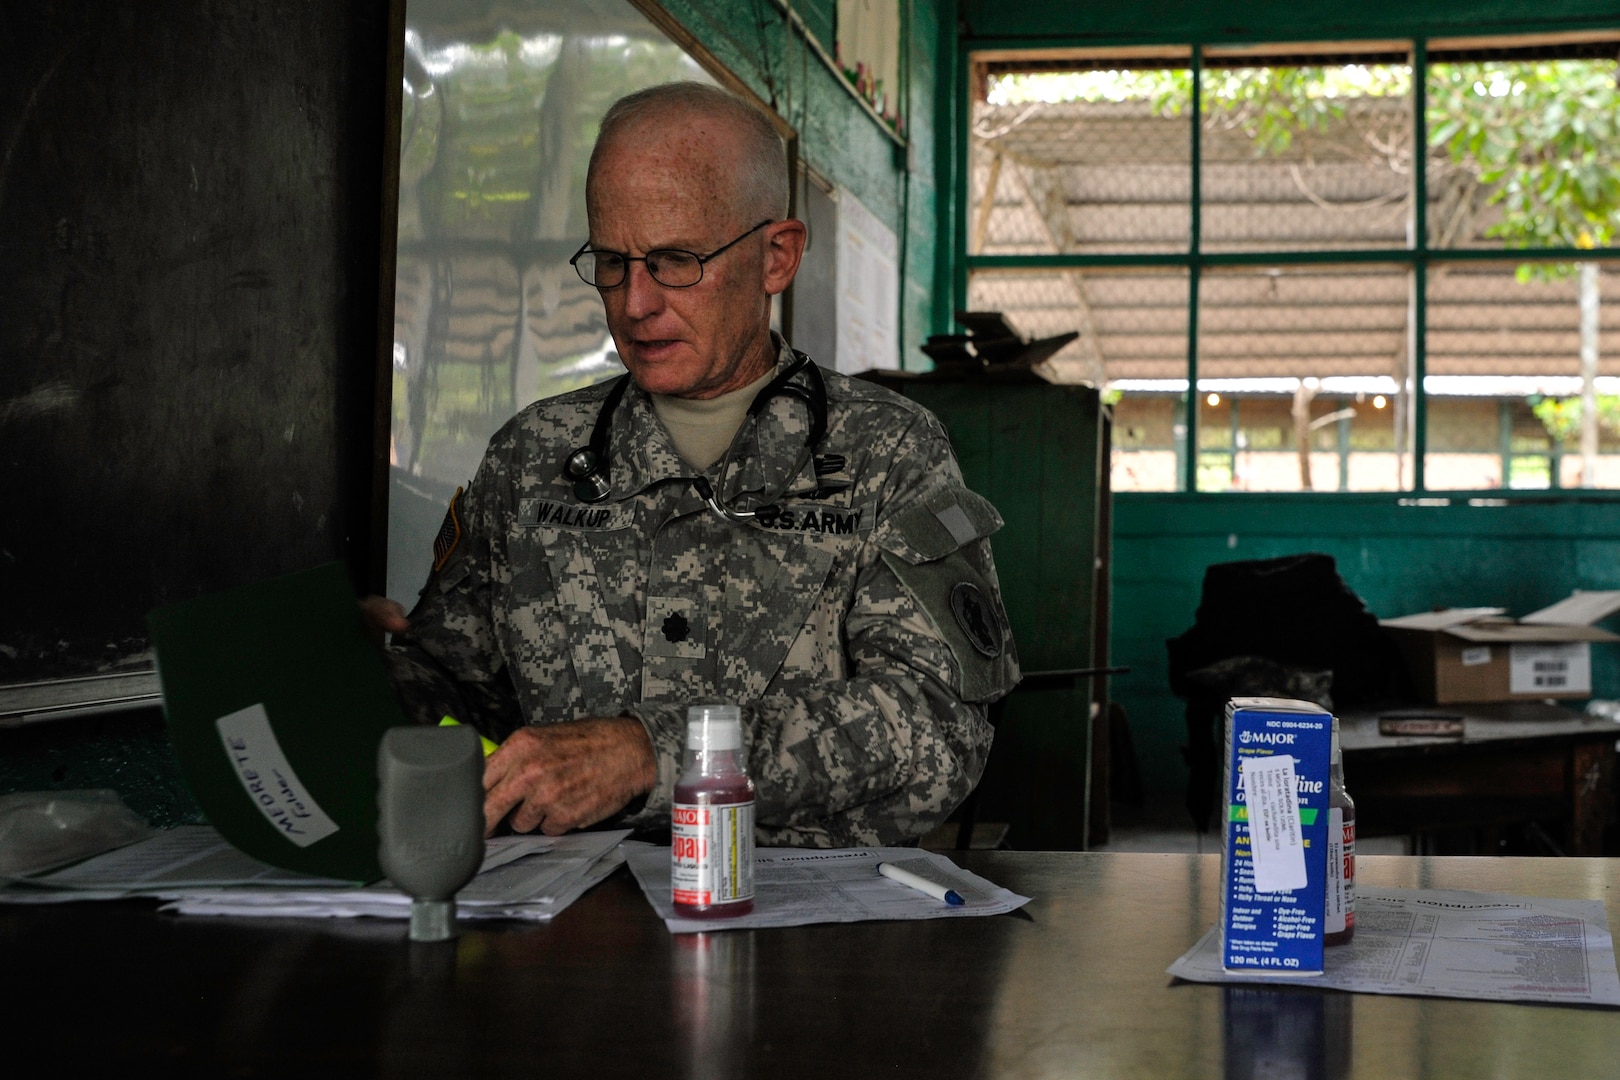 U.S. Army Lt. Col. (Dr.) Robert Walkup, Joint Task Force-Bravo Medical Element healthcare provider, reviews medication administration forms during a Medical Readiness Training Exercise operation in Trujillo, Honduras, July 29, 2016. During MEDRETEs, personnel from every section of MEDEL come together to help accomplish the mission of delivering medical care in austere conditions, promoting diplomatic relations between the U.S. and host nations in Central America, and providing humanitarian and civic assistance via a long-term proactive program. (U.S. Air Force photo by Staff Sgt. Siuta B. Ika)